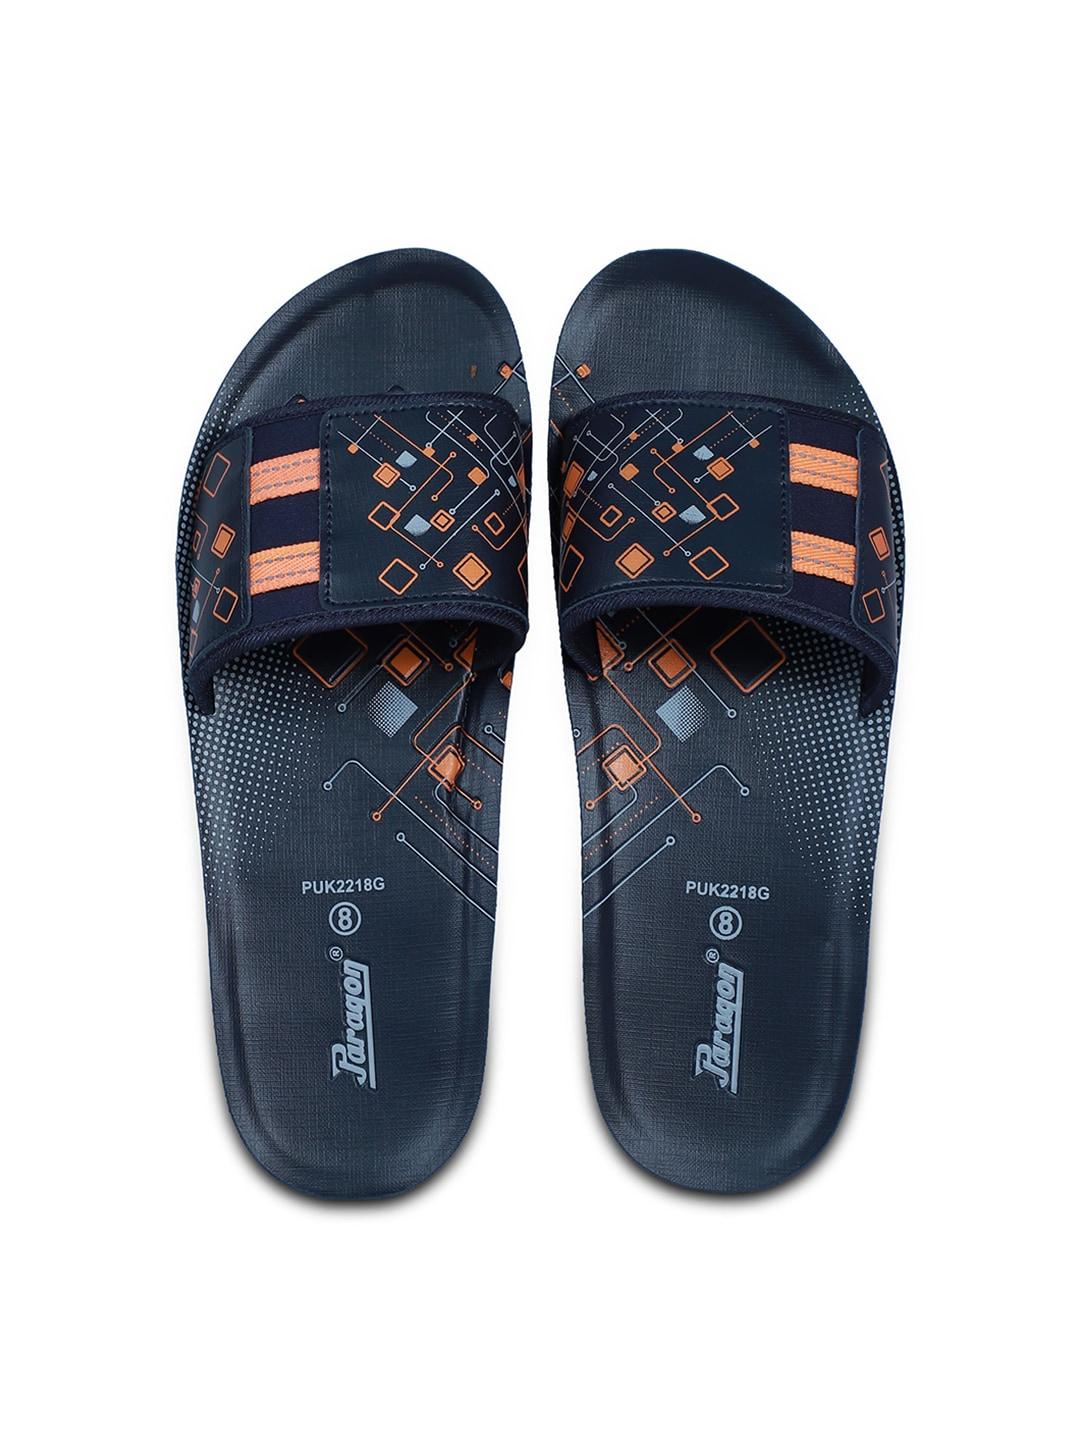 paragon men printed ultra comfortable and lightweight sliders